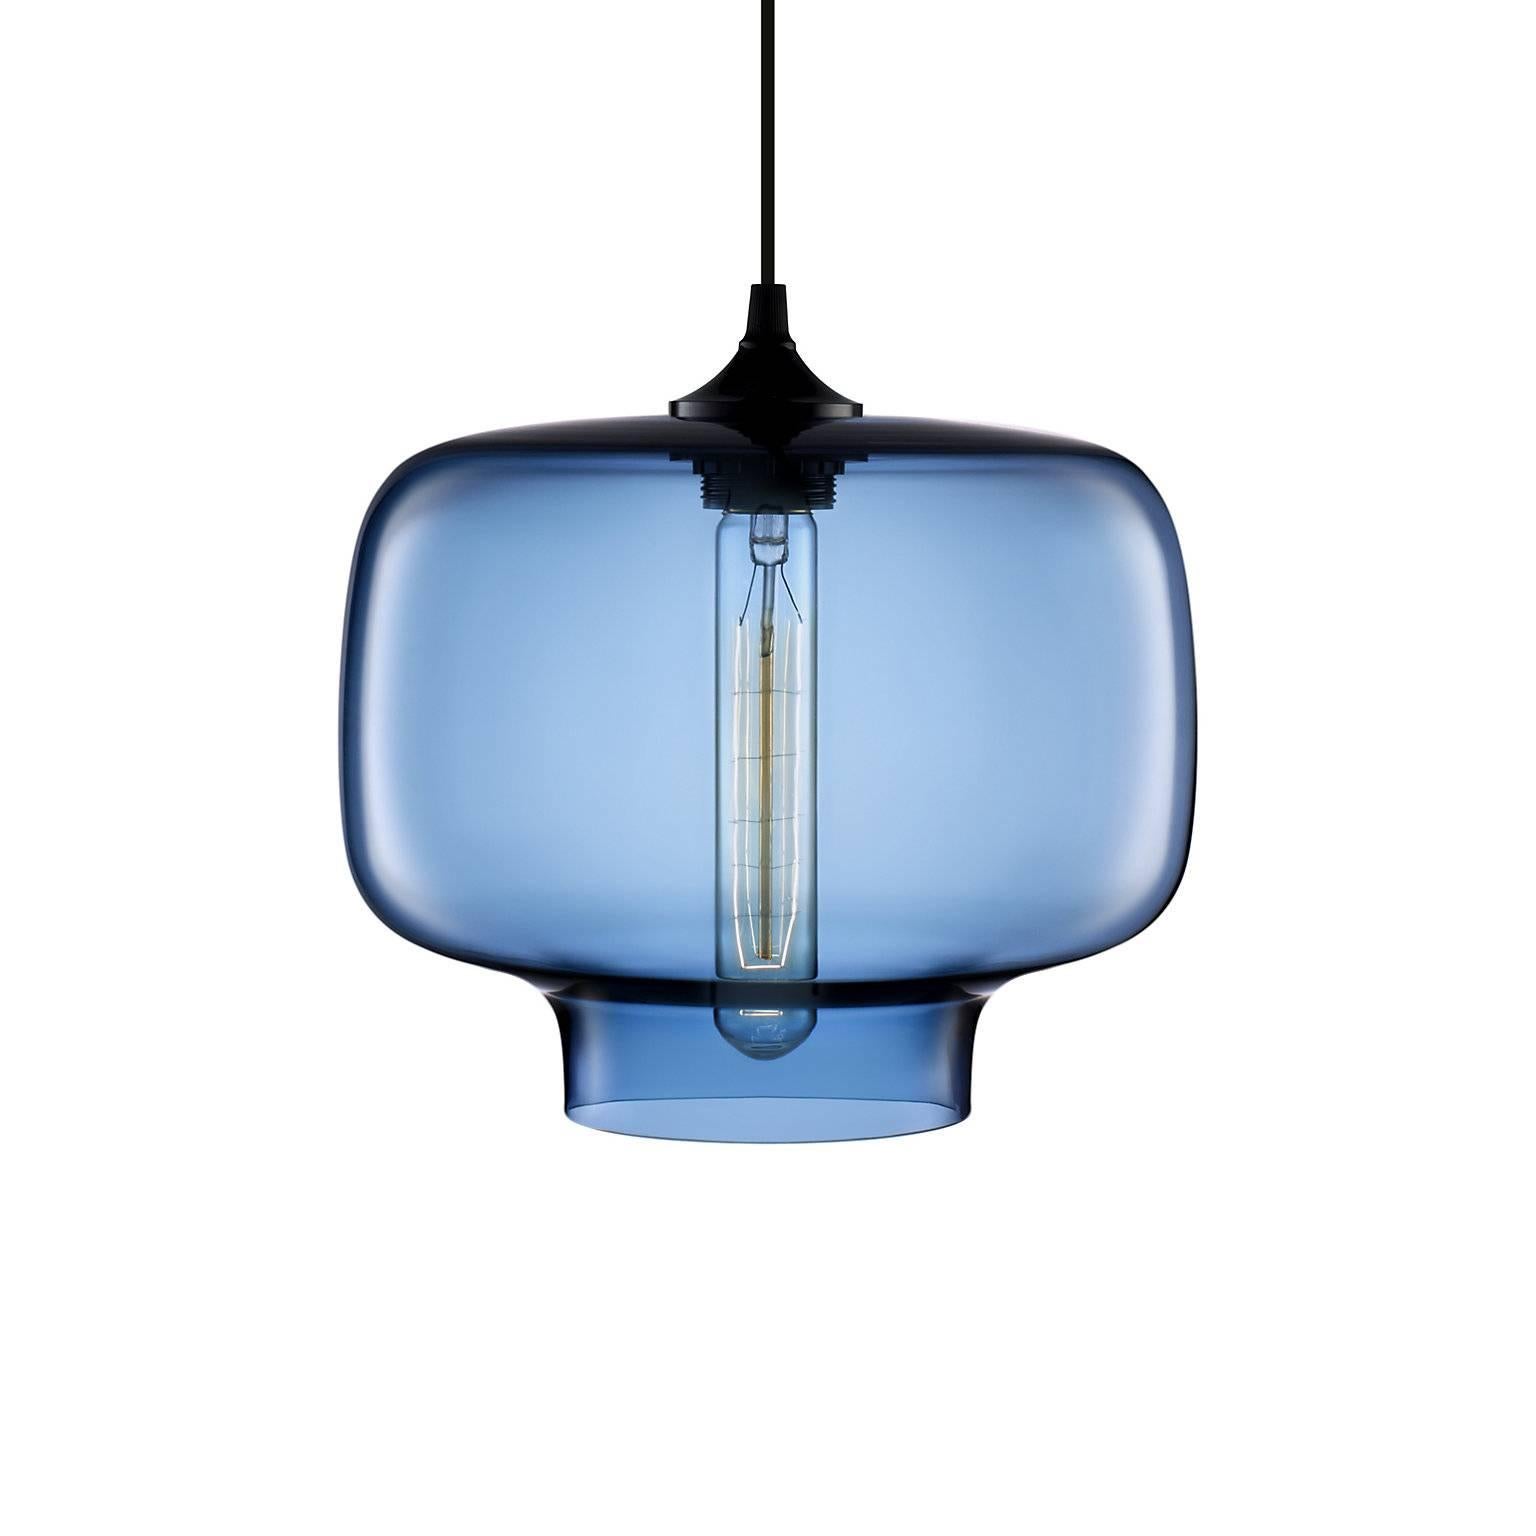 The robust frame of the Oculo pendant light garners undivided regard and praise in any environment. Every single glass pendant light that comes from Niche is handblown by real human beings in a state-of-the-art studio located in Beacon, New York.